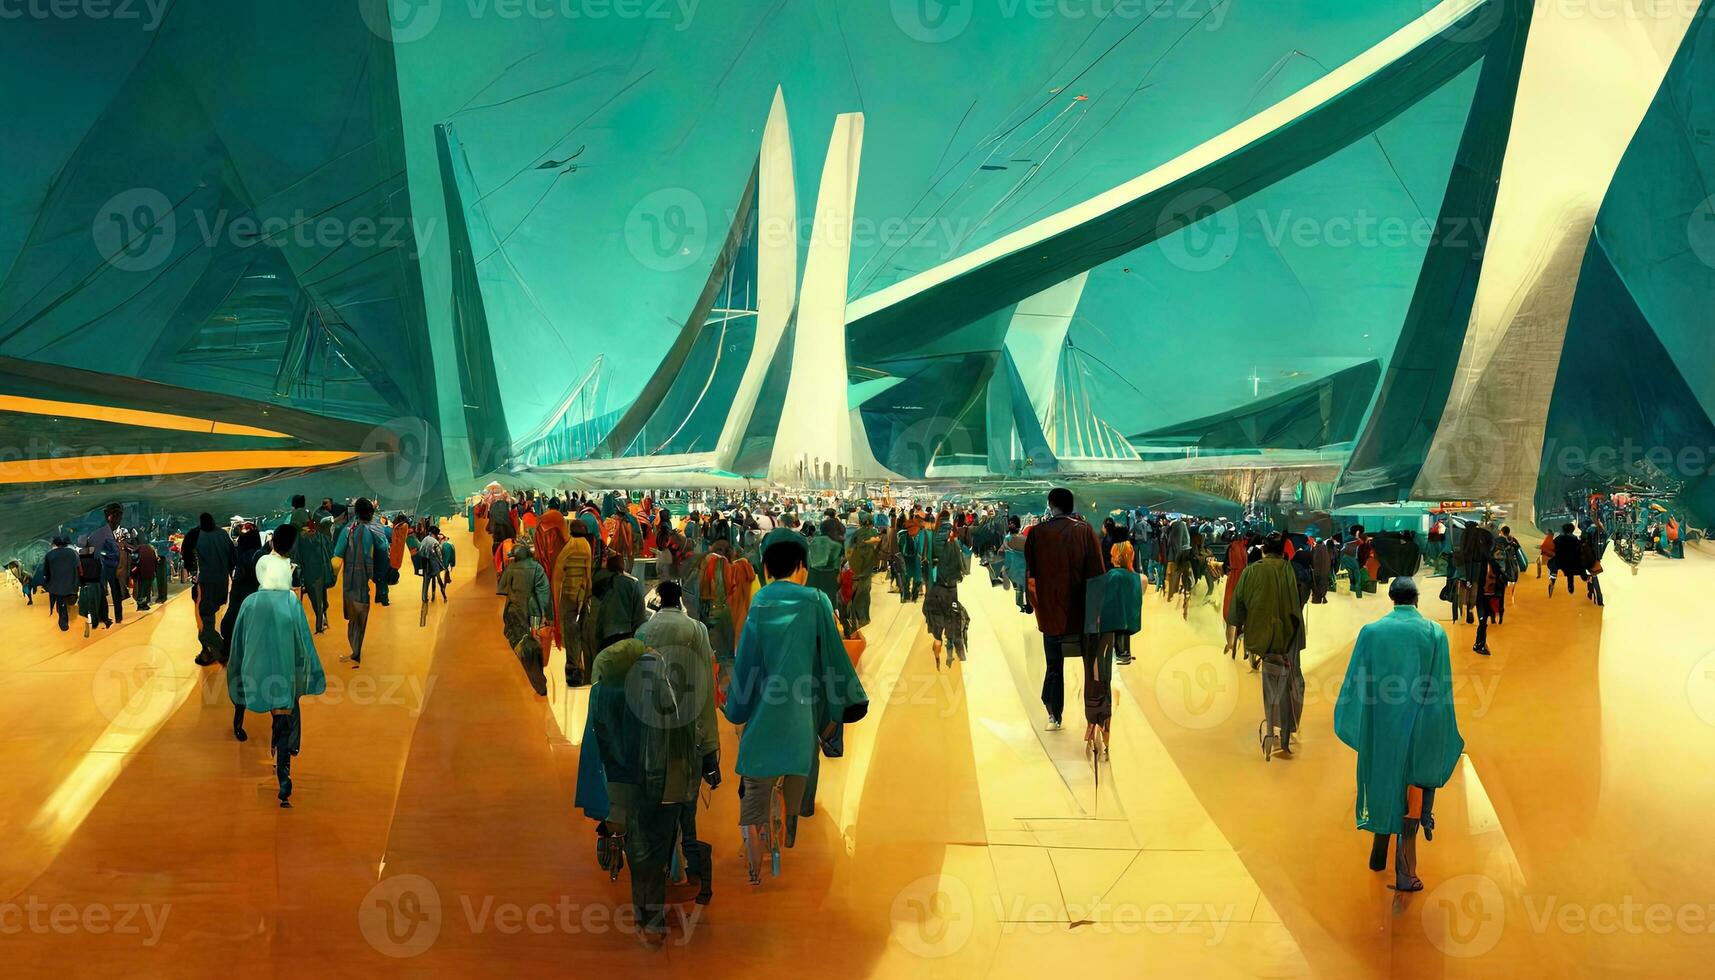 Crowded with many pedestrians, highly angled, highly geometric futuristic architecture. Futuristic eco cityscape creative concept illustration photo